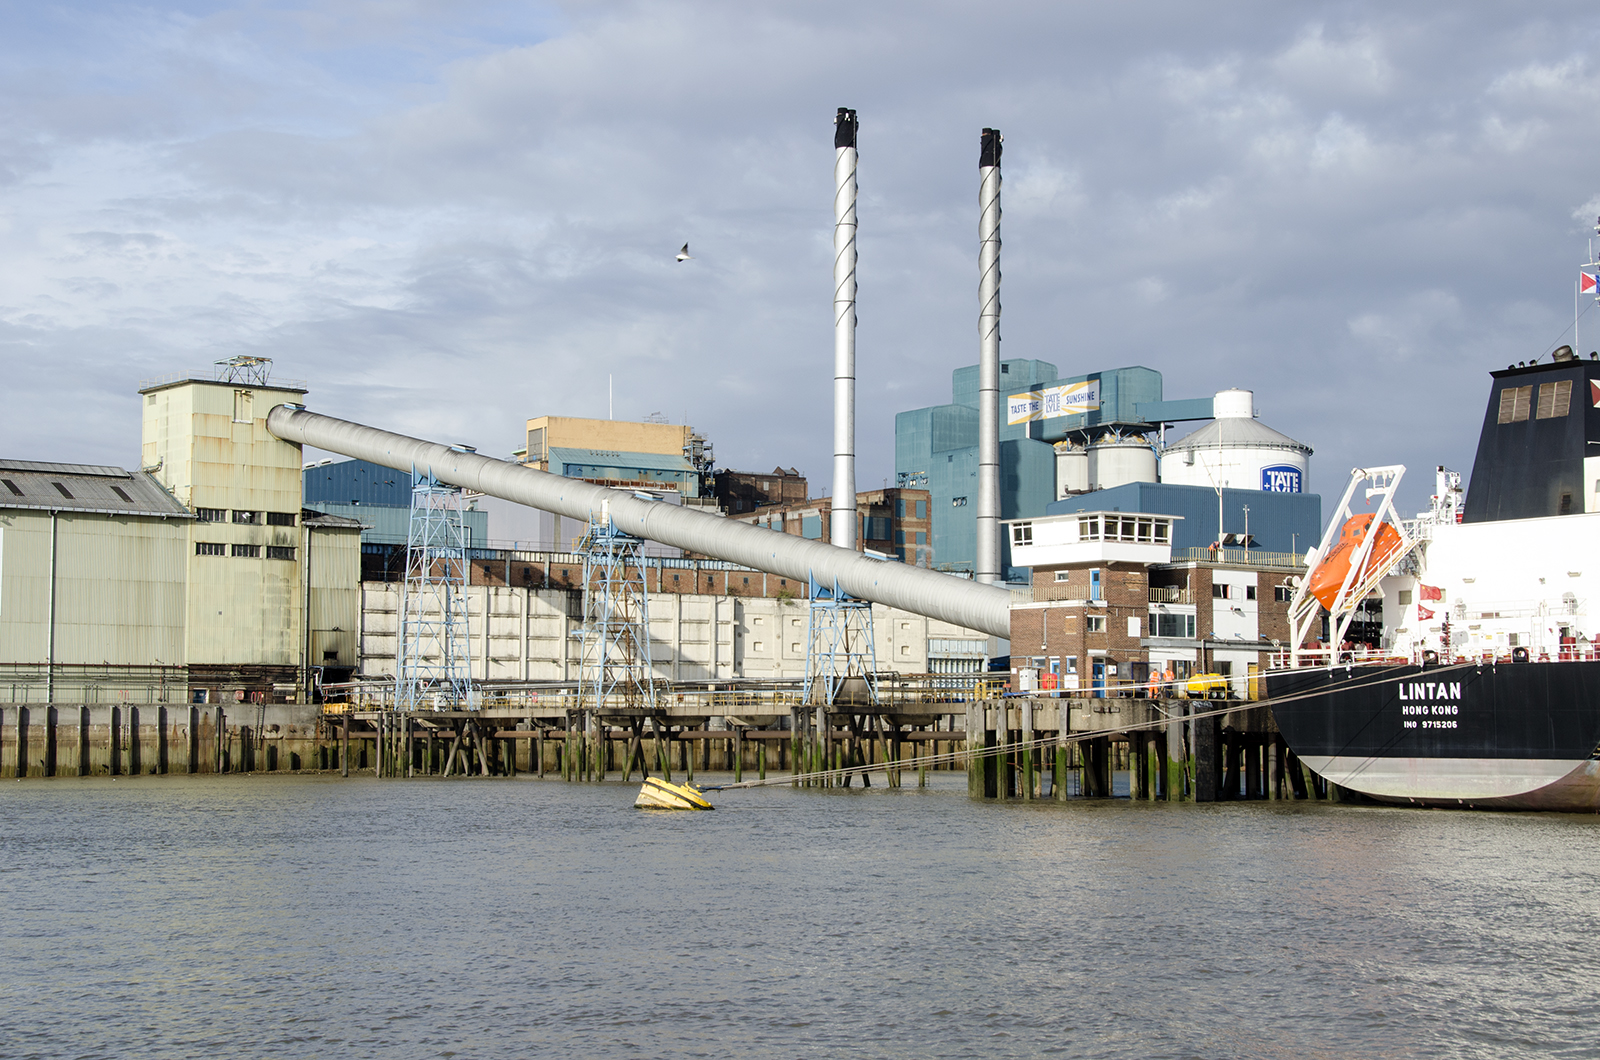 2016-09-16-Newham_Autumn_Landscape_Plaistow-Wharf-Taken-from-Thames-Tall-Ship-while-travelling-up-Galleons-Reach-Tate-Lyle